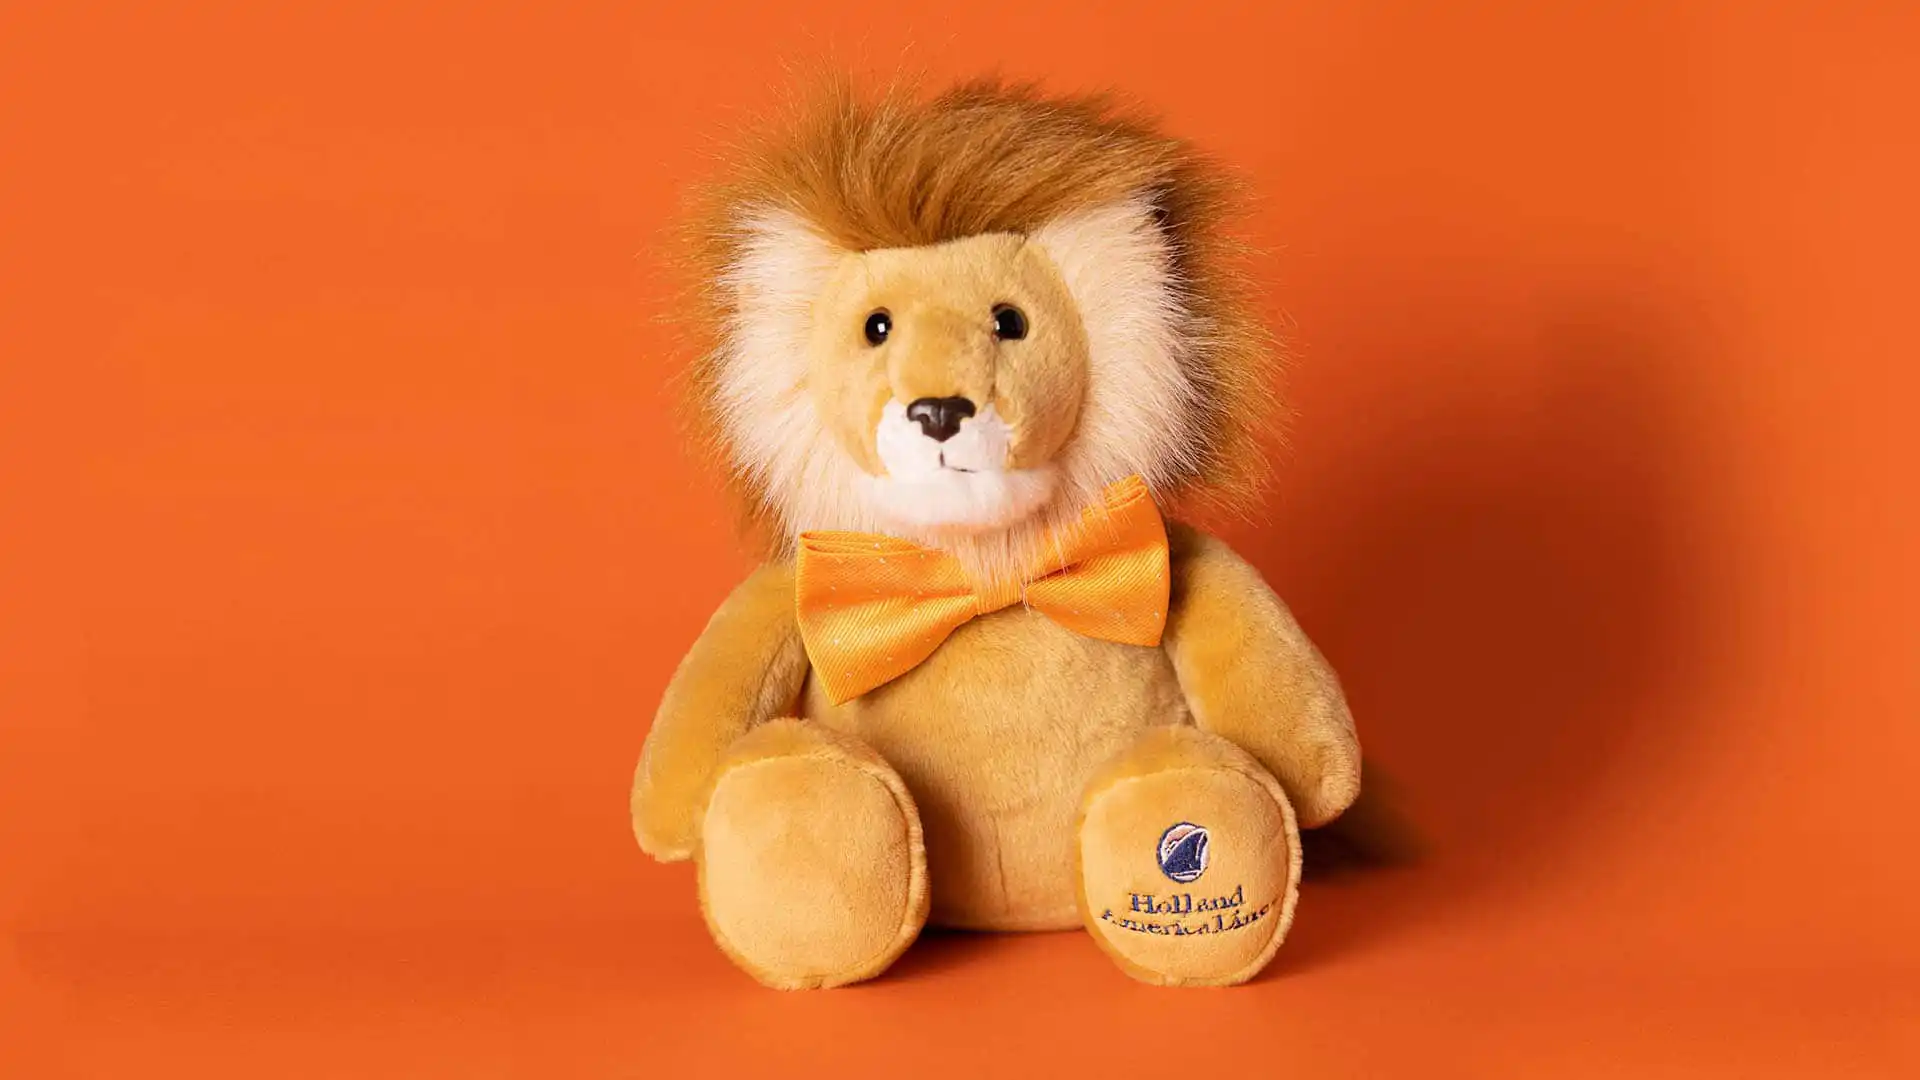 Lewie the Lion stuffed animal, Holland America Line's mascot, with orange bowtie and background.